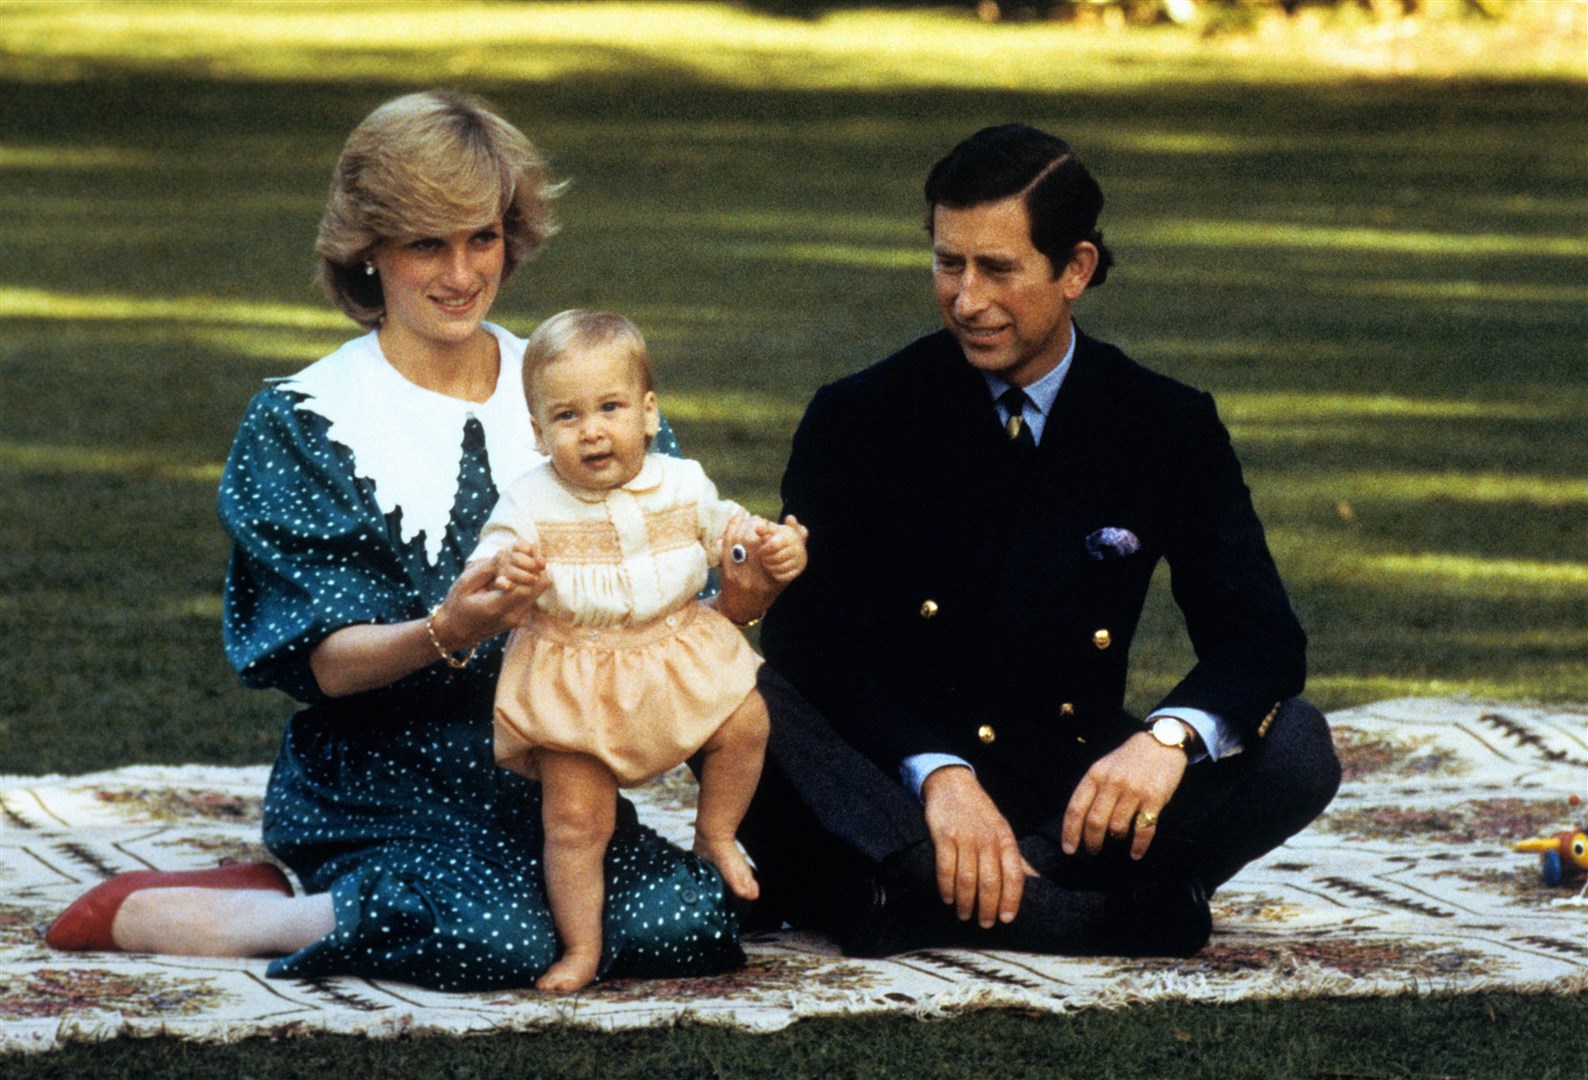 The Prince and Princess of Wales amuse baby Prince William in the grounds of Government House in Auckland, New Zealand in 1983 (PA)